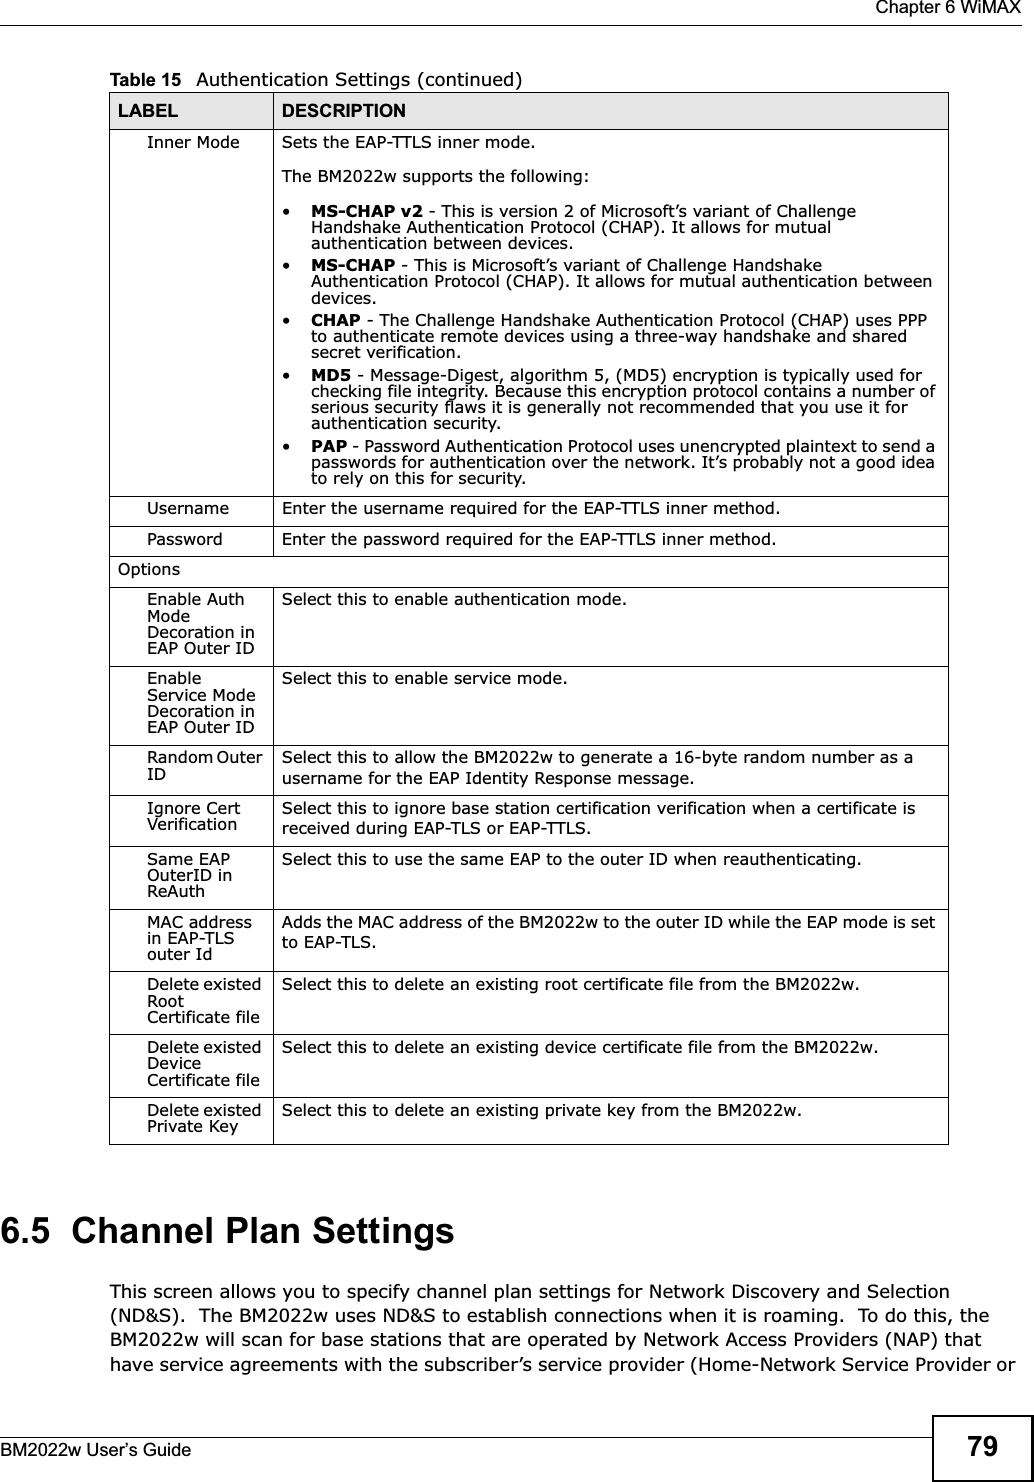  Chapter 6 WiMAXBM2022w User’s Guide 796.5  Channel Plan SettingsThis screen allows you to specify channel plan settings for Network Discovery and Selection (ND&amp;S).  The BM2022w uses ND&amp;S to establish connections when it is roaming.  To do this, the BM2022w will scan for base stations that are operated by Network Access Providers (NAP) that have service agreements with the subscriber’s service provider (Home-Network Service Provider or Inner Mode Sets the EAP-TTLS inner mode.The BM2022w supports the following:•MS-CHAP v2 - This is version 2 of Microsoft’s variant of Challenge Handshake Authentication Protocol (CHAP). It allows for mutual authentication between devices.•MS-CHAP - This is Microsoft’s variant of Challenge Handshake Authentication Protocol (CHAP). It allows for mutual authentication between devices.•CHAP - The Challenge Handshake Authentication Protocol (CHAP) uses PPP to authenticate remote devices using a three-way handshake and shared secret verification.•MD5 - Message-Digest, algorithm 5, (MD5) encryption is typically used for checking file integrity. Because this encryption protocol contains a number of serious security flaws it is generally not recommended that you use it for authentication security.•PAP - Password Authentication Protocol uses unencrypted plaintext to send a passwords for authentication over the network. It’s probably not a good idea to rely on this for security.Username Enter the username required for the EAP-TTLS inner method.Password Enter the password required for the EAP-TTLS inner method.OptionsEnable Auth ModeDecoration in EAP Outer IDSelect this to enable authentication mode.EnableService Mode Decoration in EAP Outer IDSelect this to enable service mode.Random Outer ID Select this to allow the BM2022w to generate a 16-byte random number as a username for the EAP Identity Response message.Ignore Cert Verification Select this to ignore base station certification verification when a certificate is received during EAP-TLS or EAP-TTLS.Same EAP OuterID in ReAuthSelect this to use the same EAP to the outer ID when reauthenticating.MAC address in EAP-TLS outer IdAdds the MAC address of the BM2022w to the outer ID while the EAP mode is set to EAP-TLS.Delete existed Root Certificate fileSelect this to delete an existing root certificate file from the BM2022w.Delete existed Device Certificate fileSelect this to delete an existing device certificate file from the BM2022w.Delete existed Private Key Select this to delete an existing private key from the BM2022w.Table 15   Authentication Settings (continued)LABEL DESCRIPTION